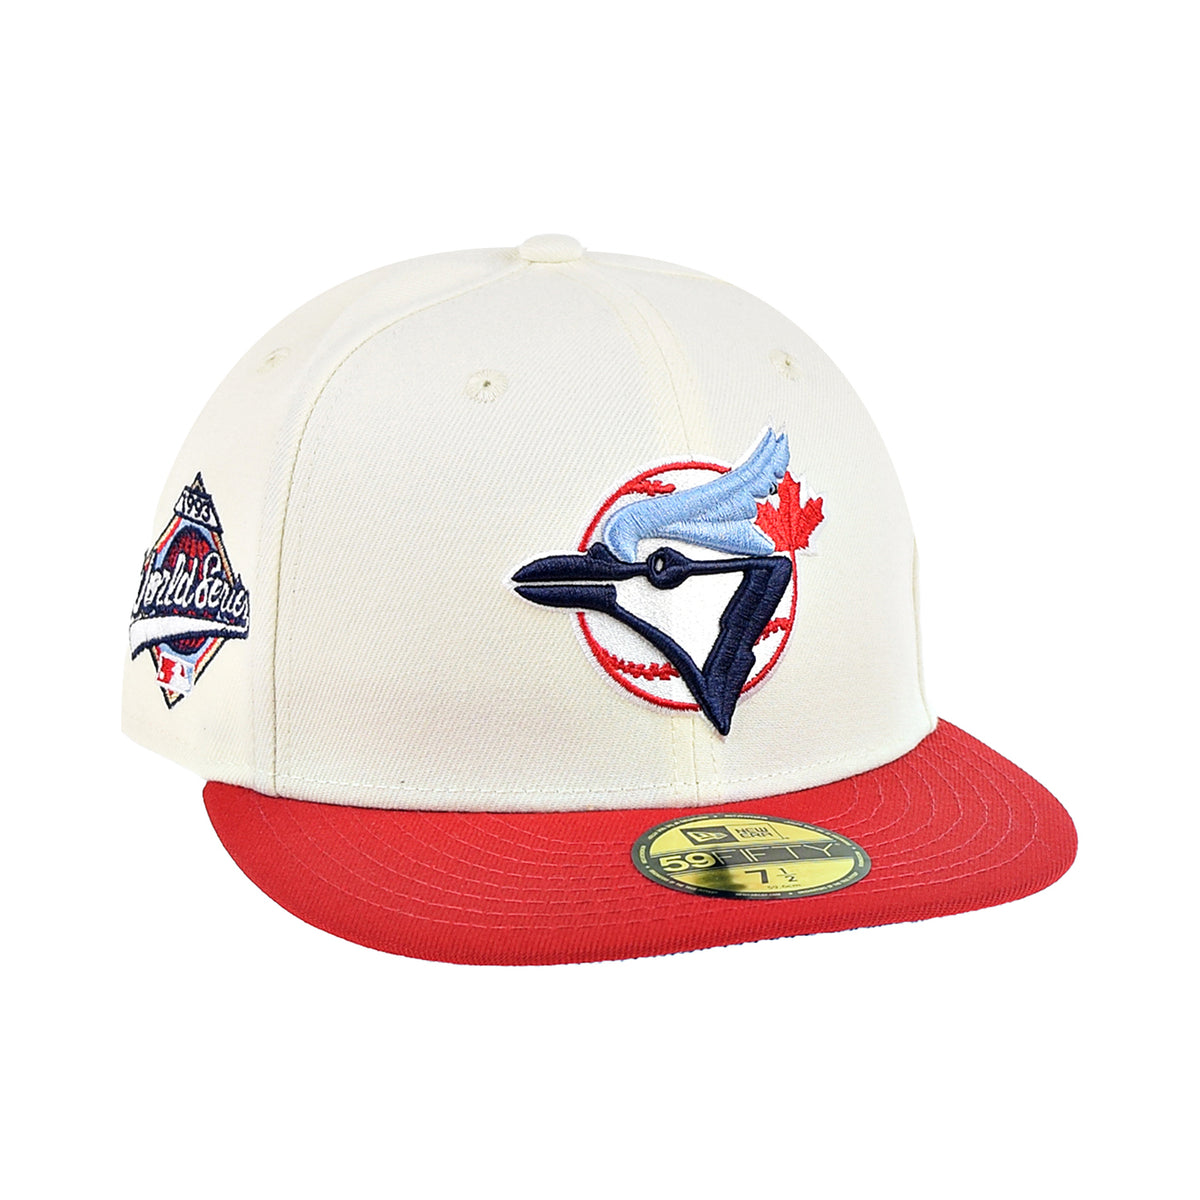 New Era Toronto Blue Jays 1993 World Series 59FIFTY Men's Fitted Hat Off-White Chrome-Scarlet / 7 3/4